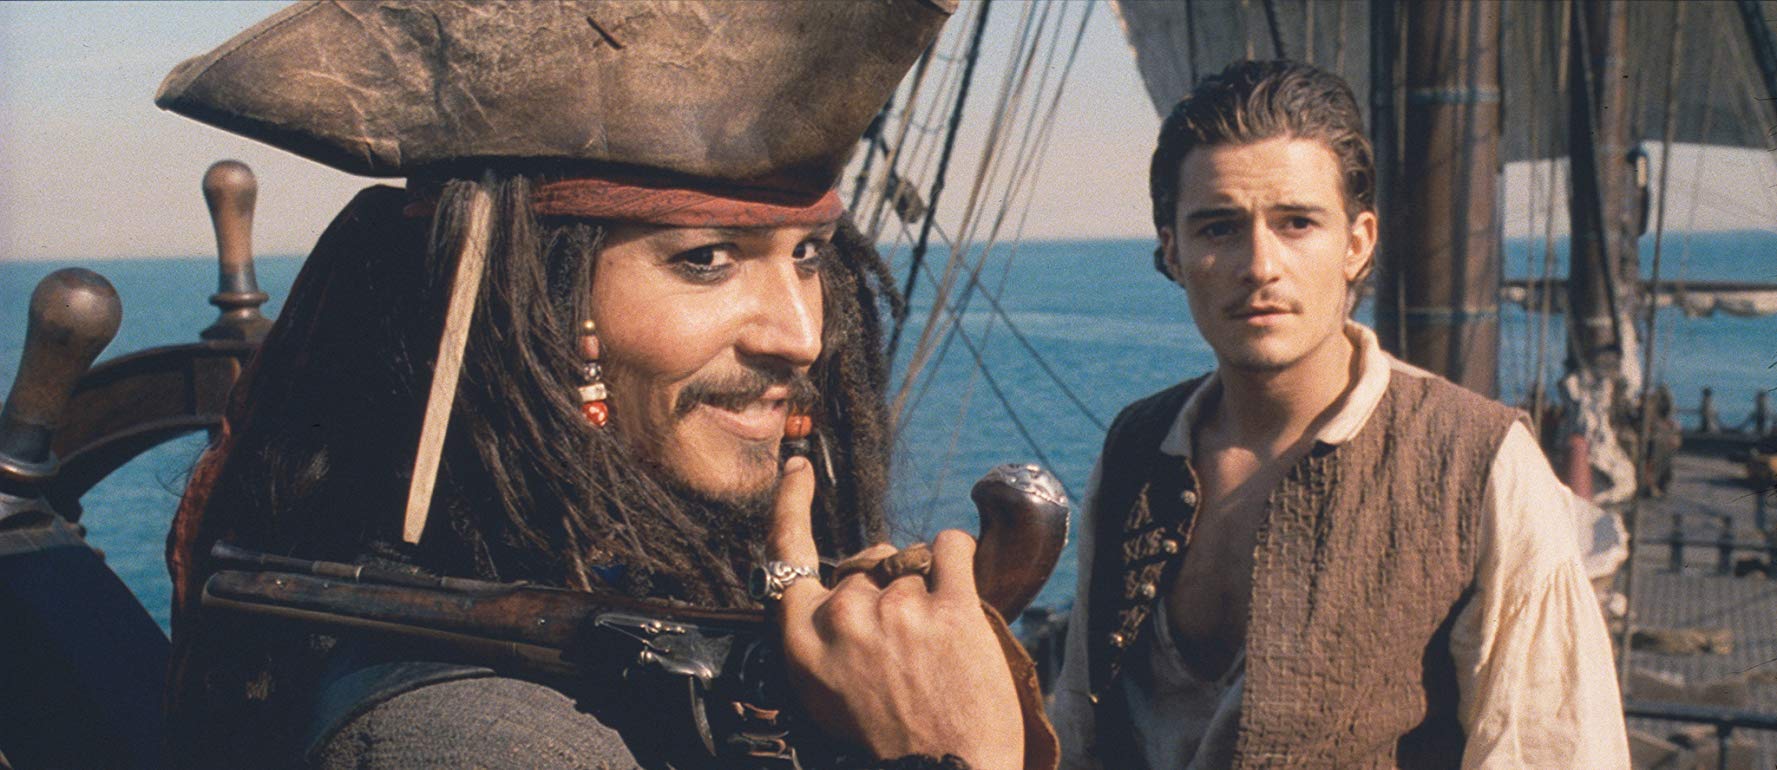 Orlando Bloom and Johnny Depp (Jack Sparrow) Pirates of the Caribbean: The Curse of the Black Pearl